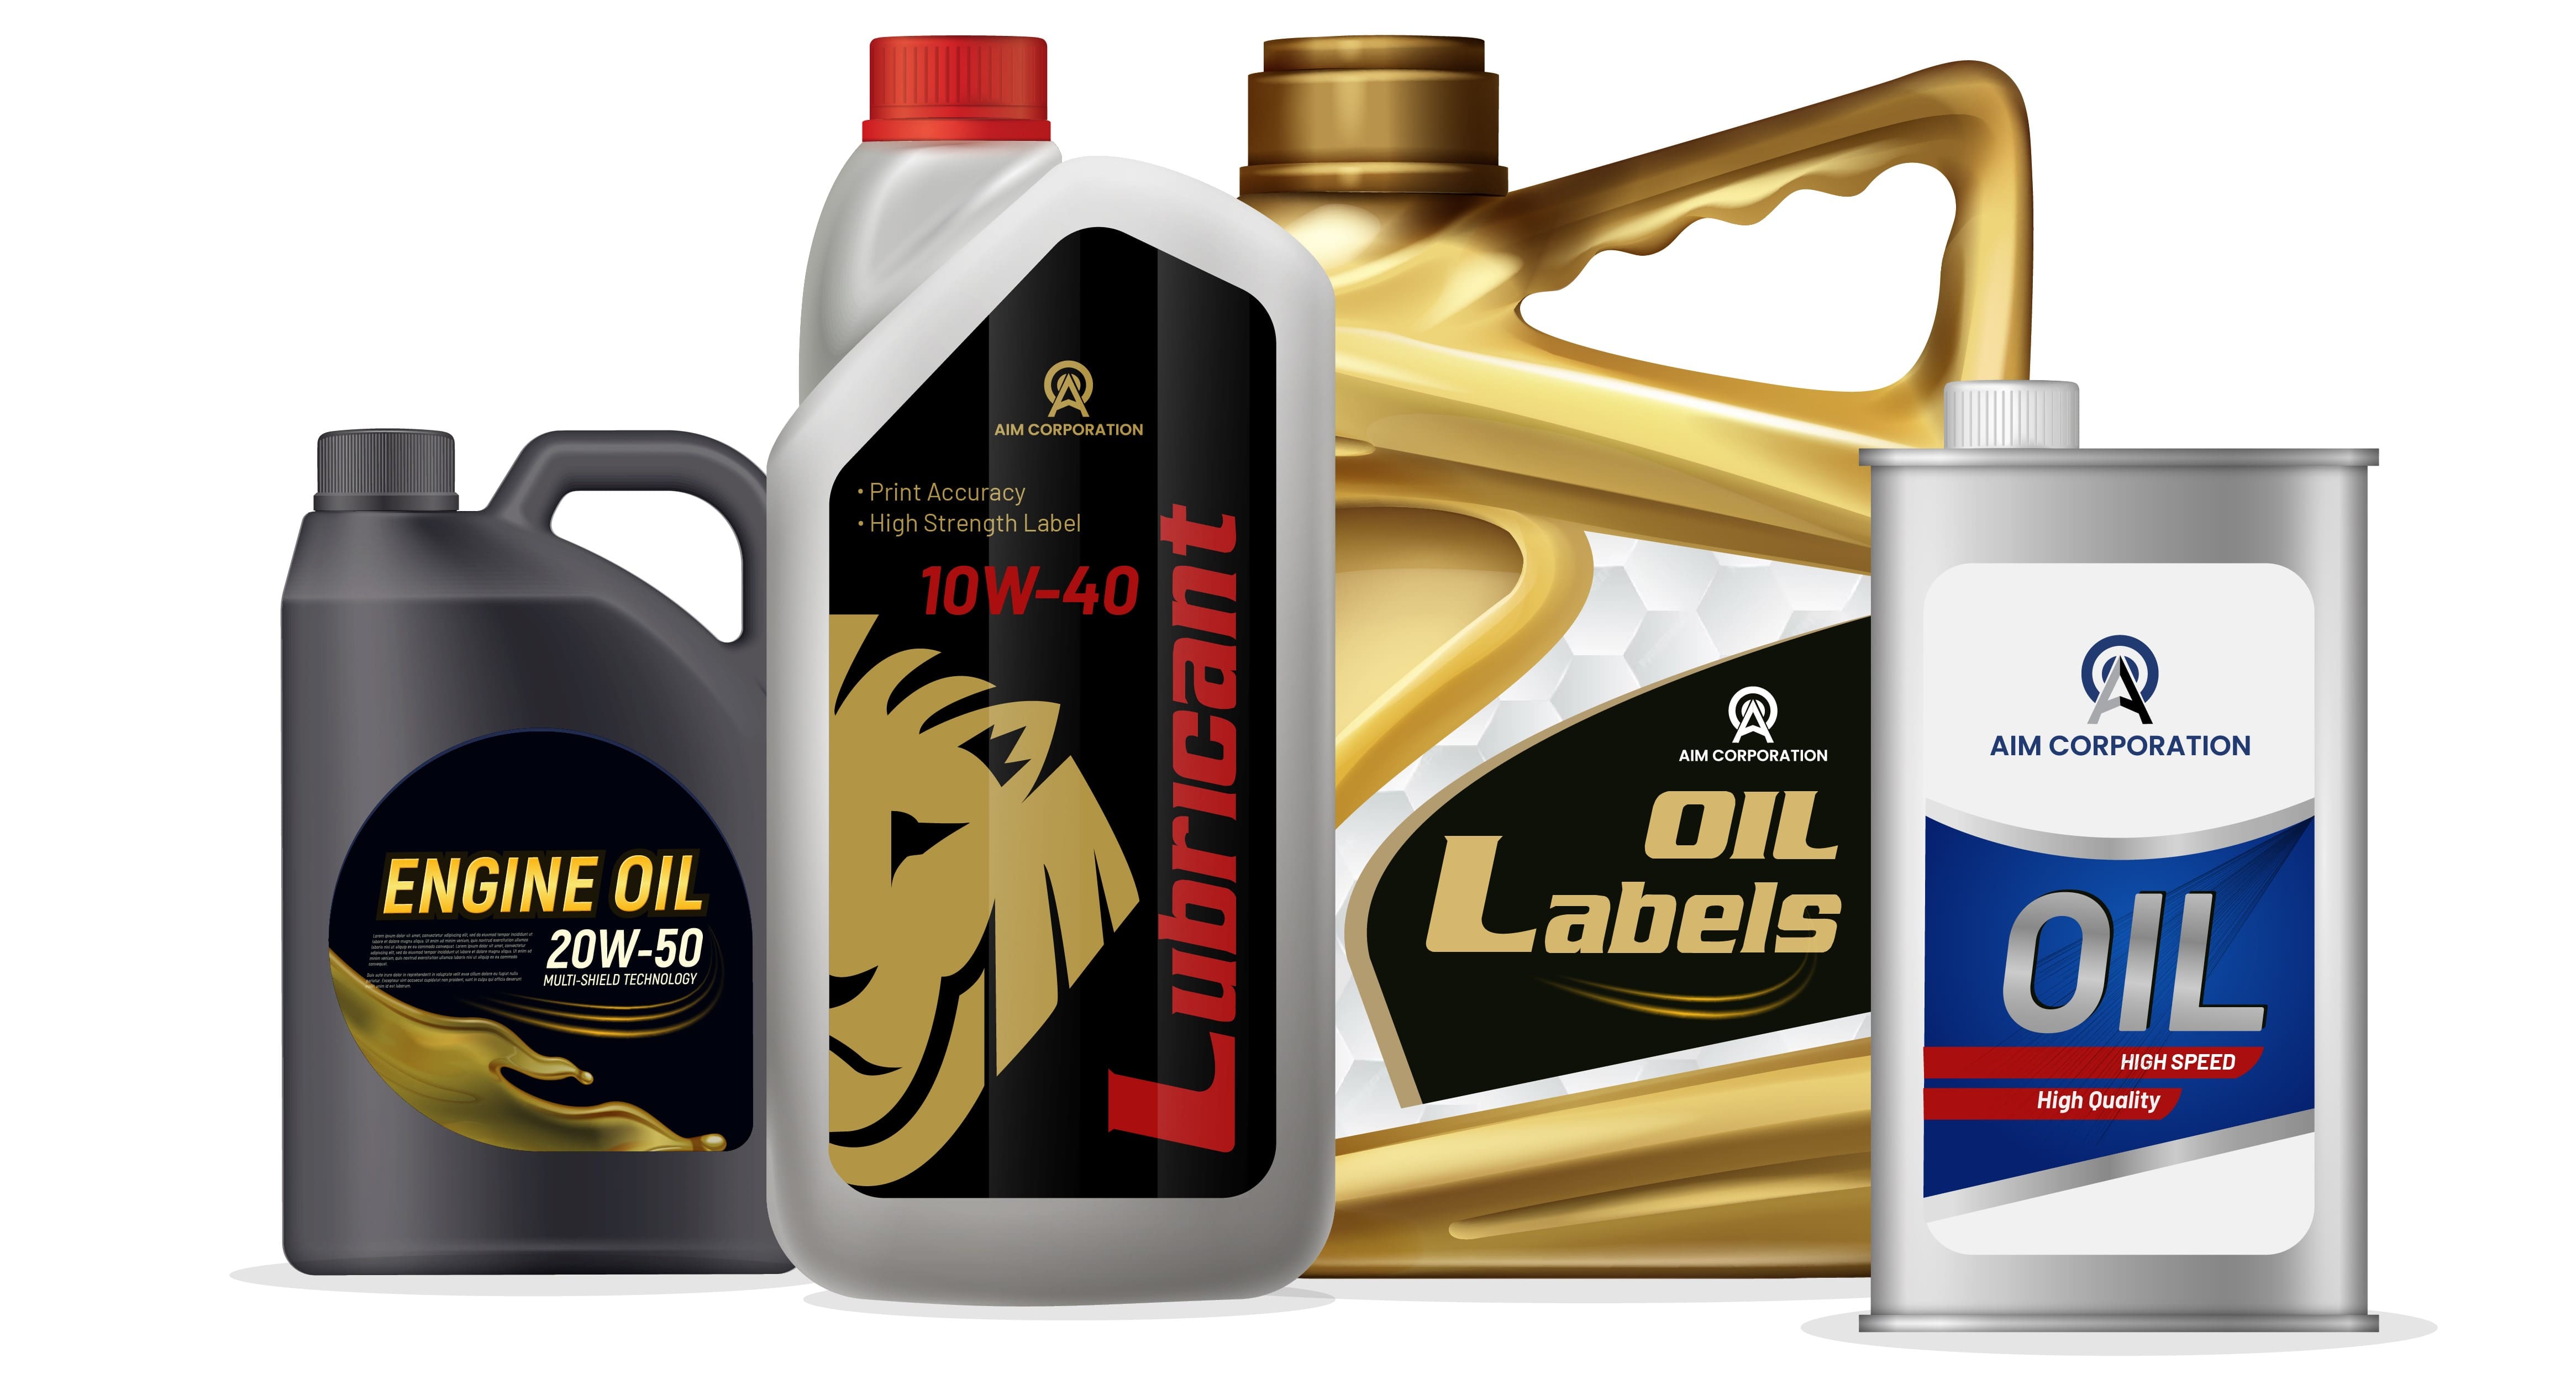 CHEMICAL AND LUBRICANTS